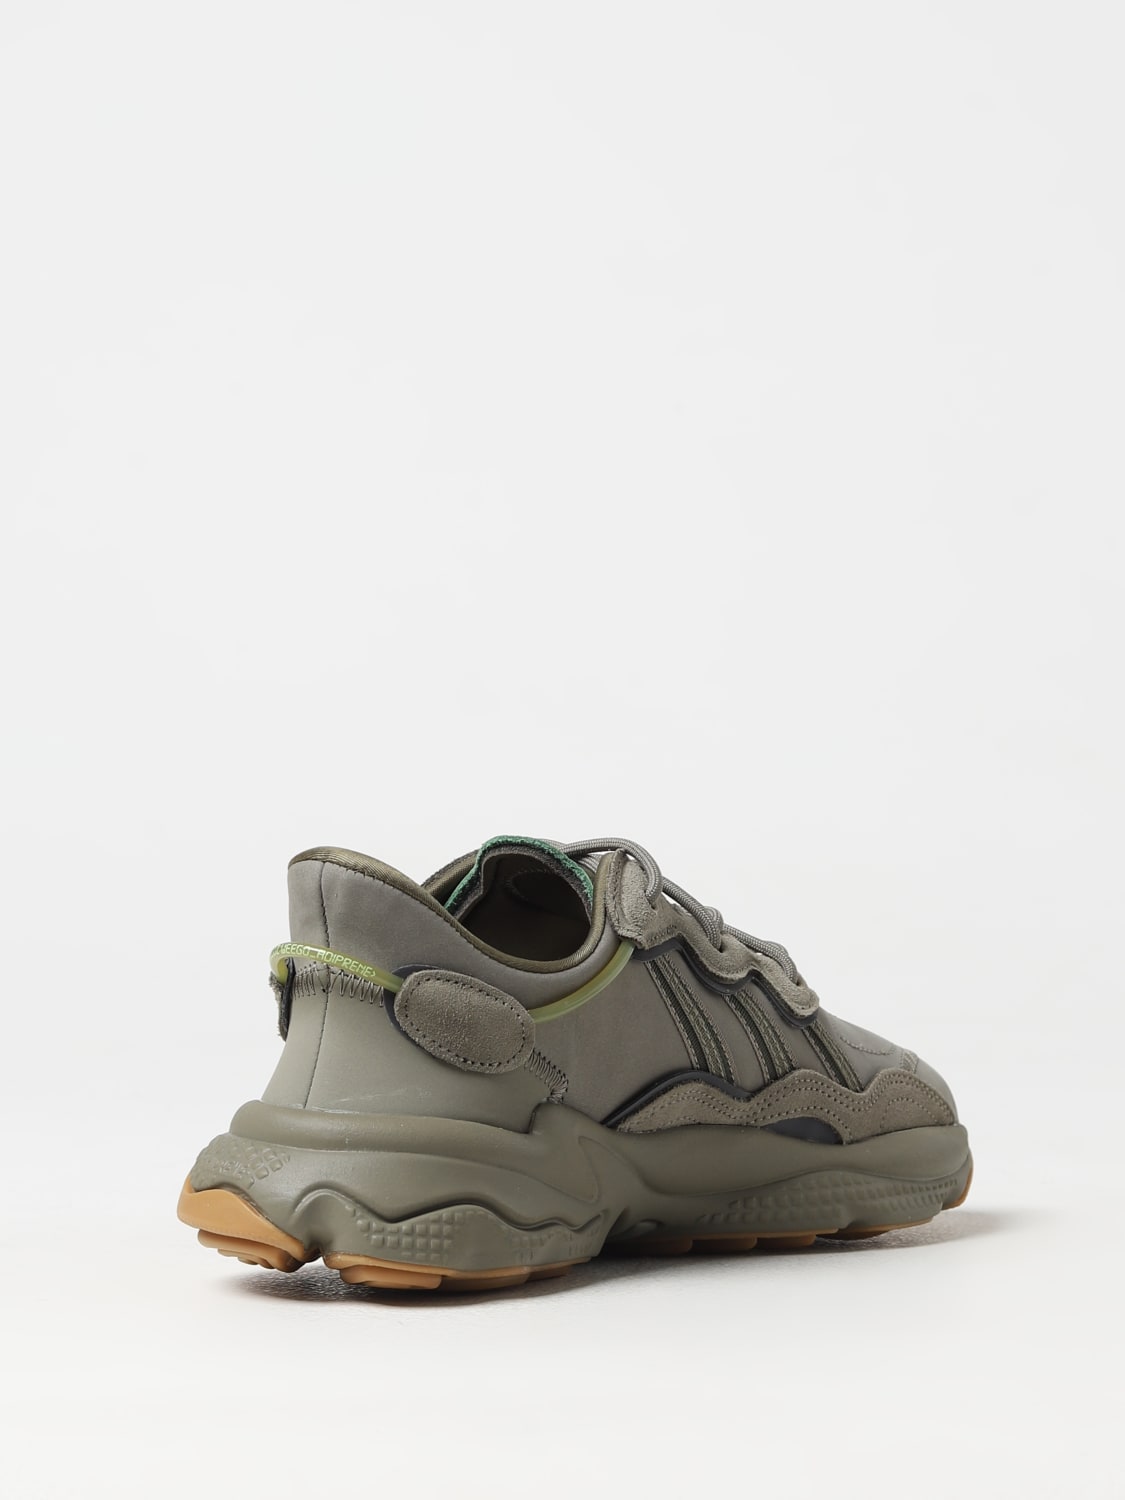 Green in - Ozweego online EE6461 sneakers Adidas at | ORIGINALS: Originals sneakers ADIDAS suede